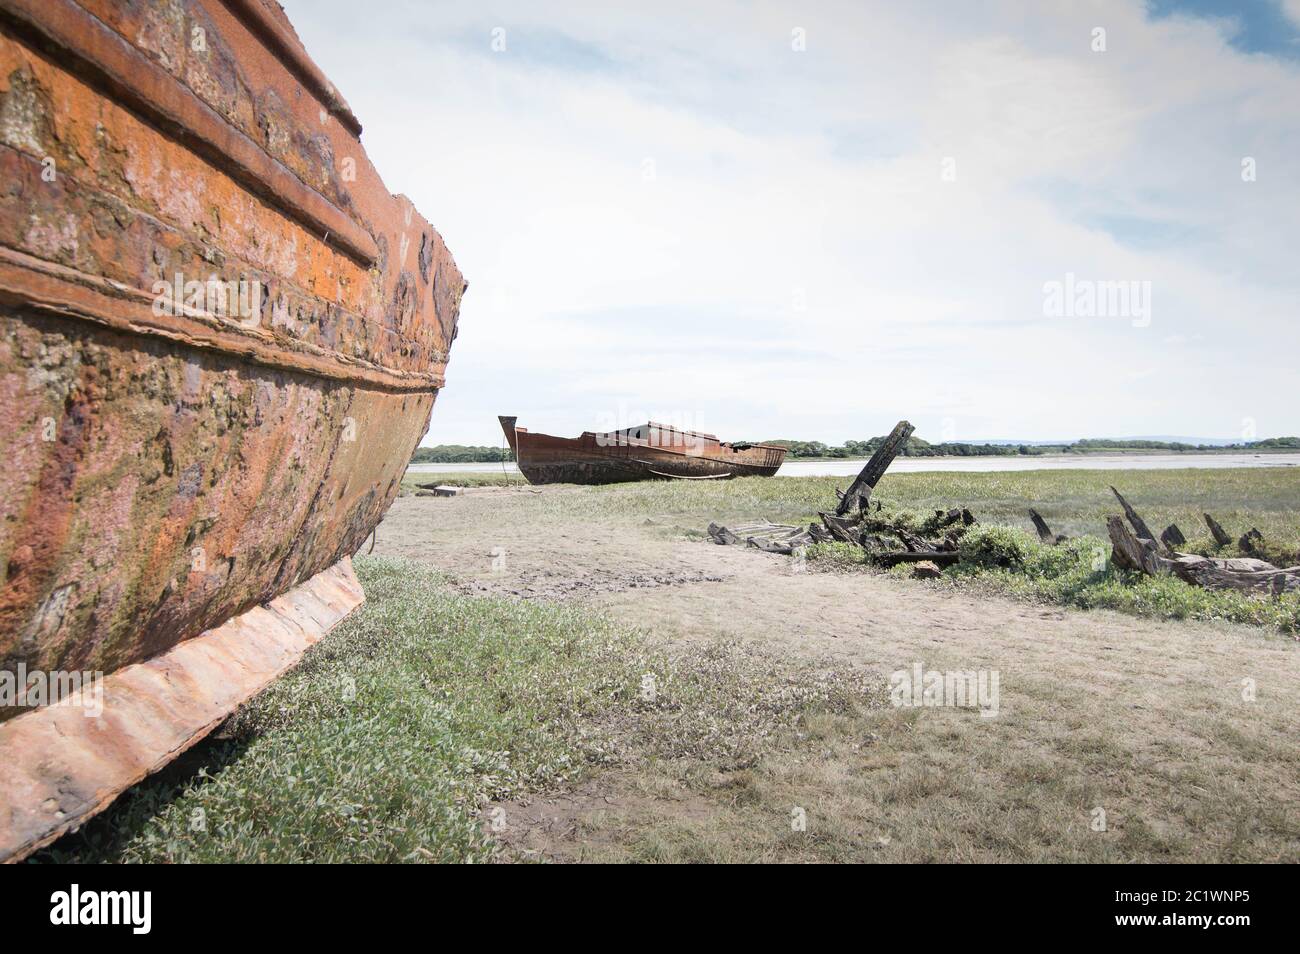 Two rusty old shipwrecks by a river Stock Photo